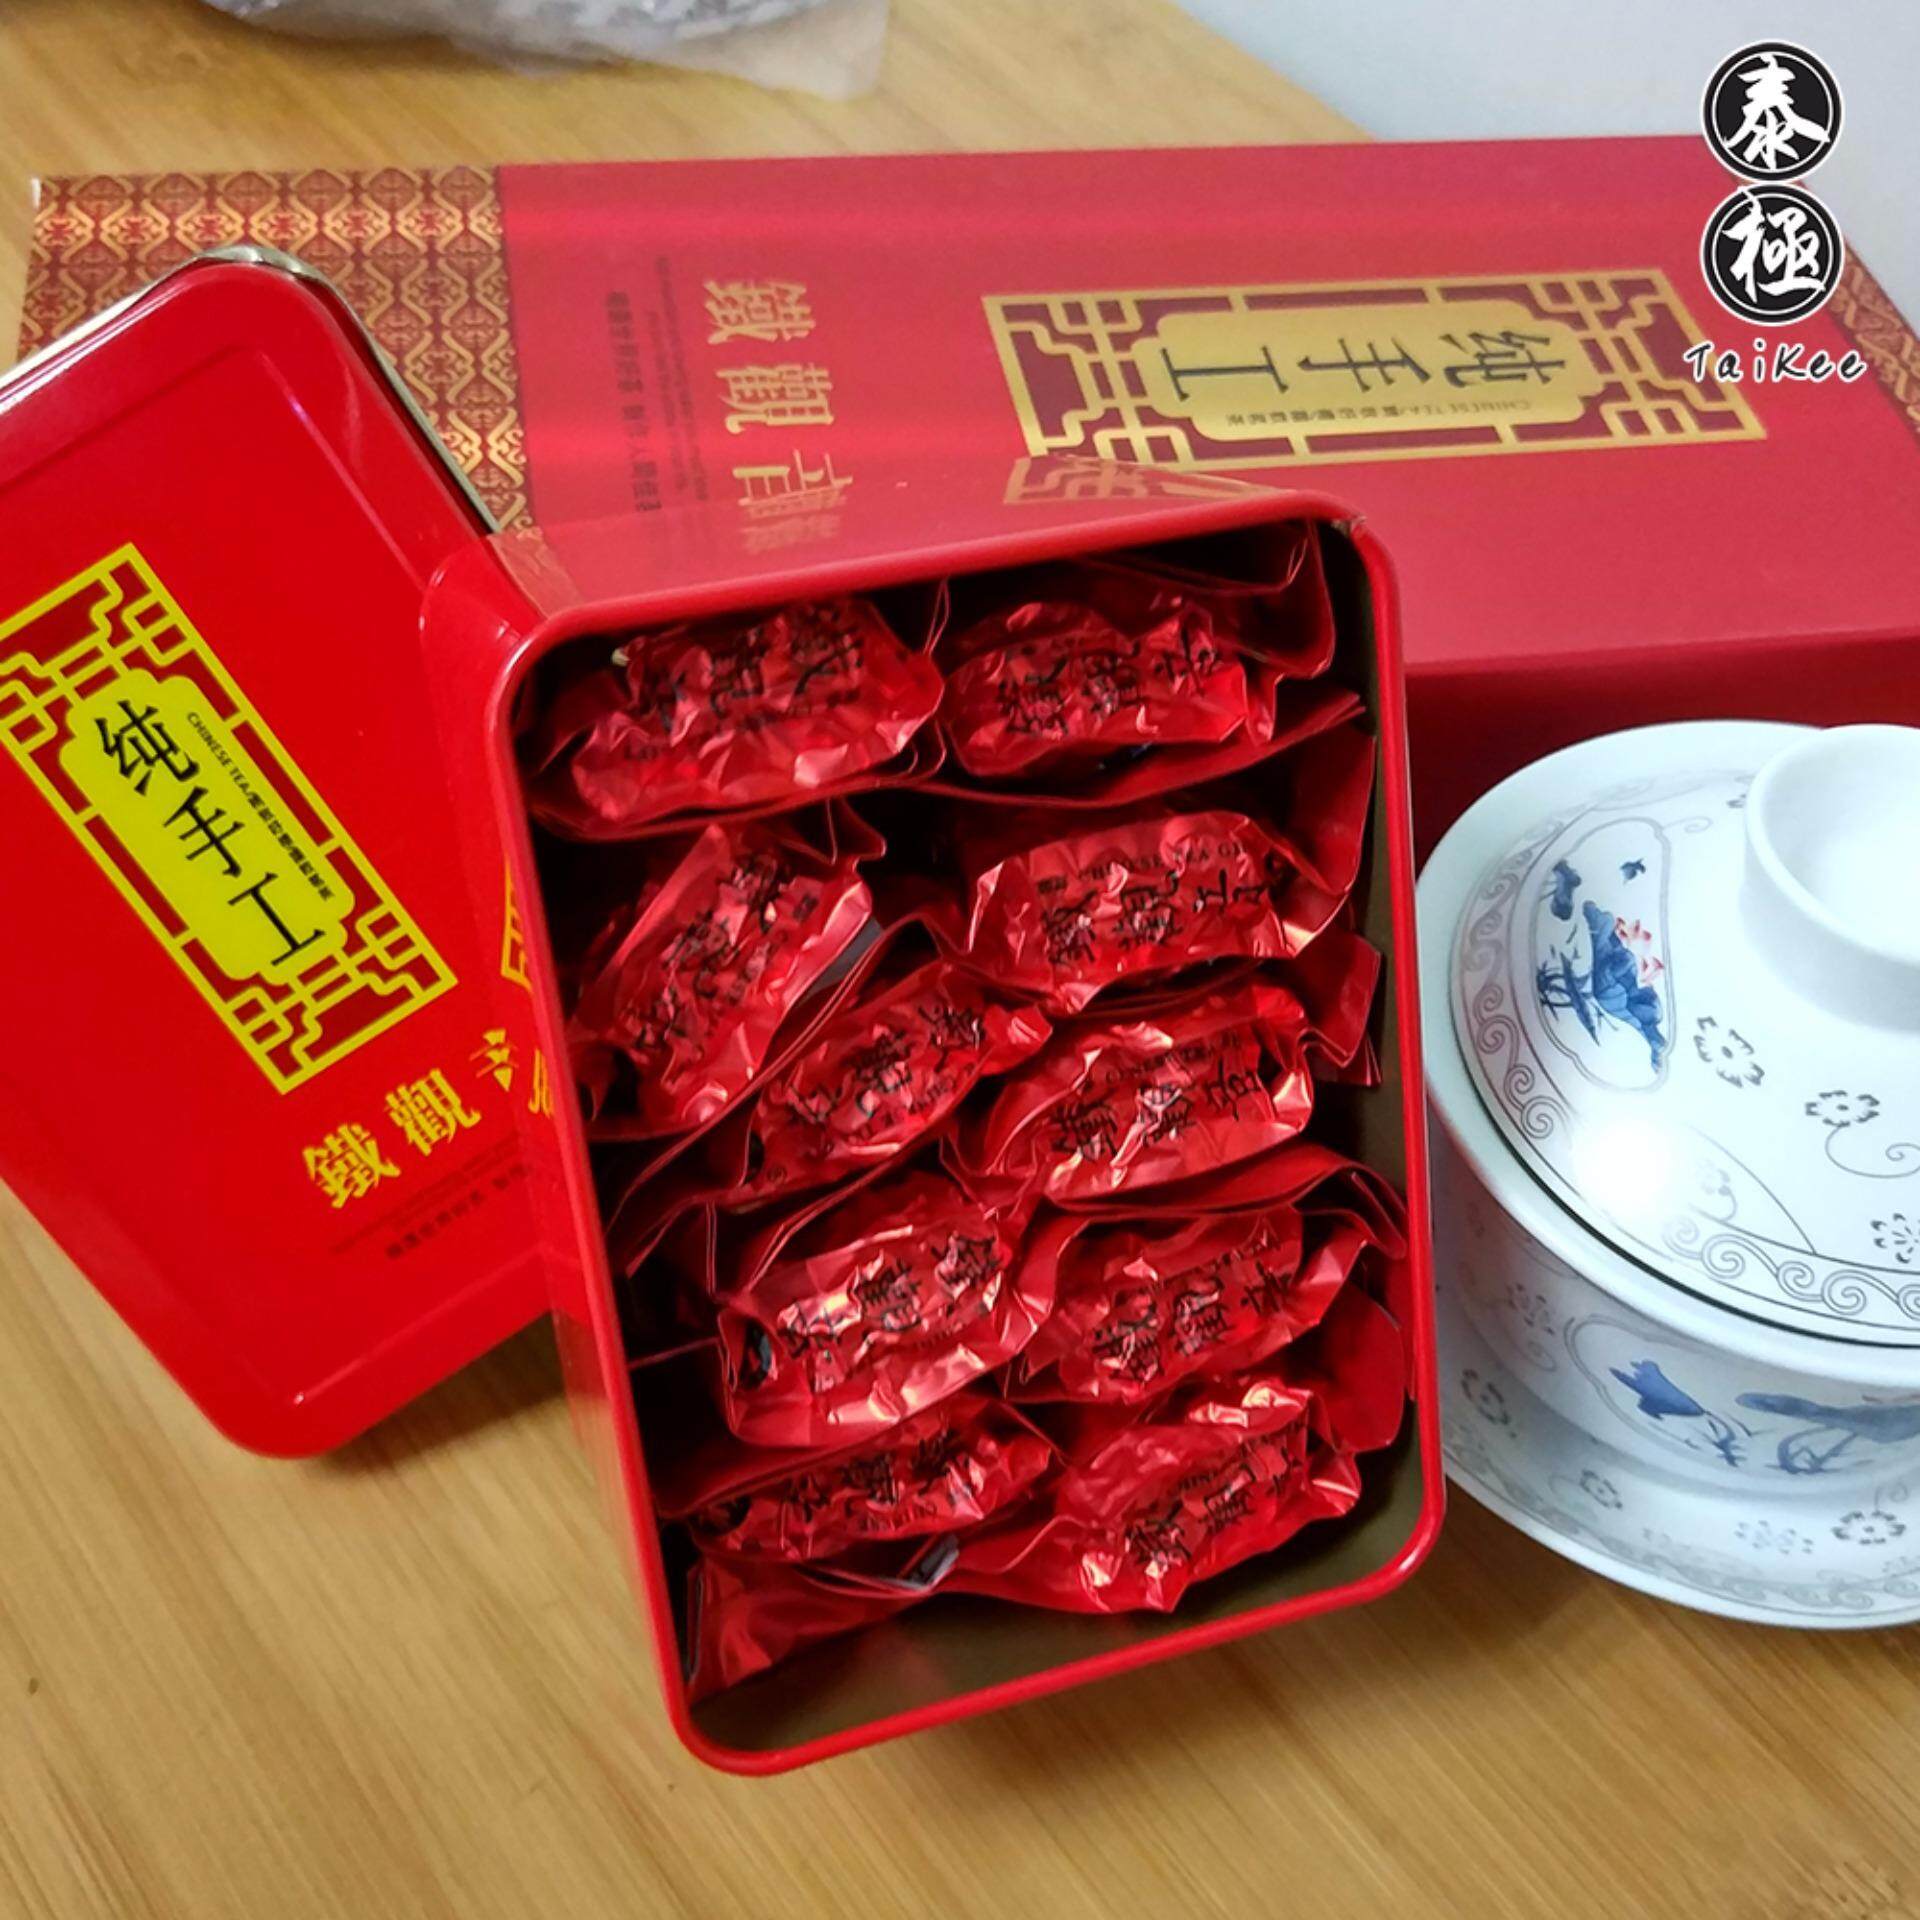 Chinese Tea Tie Guan Yin Oolong Tea Gift Collection (8packs) Ideal as Gift 新市上货铁观音乌龙茶